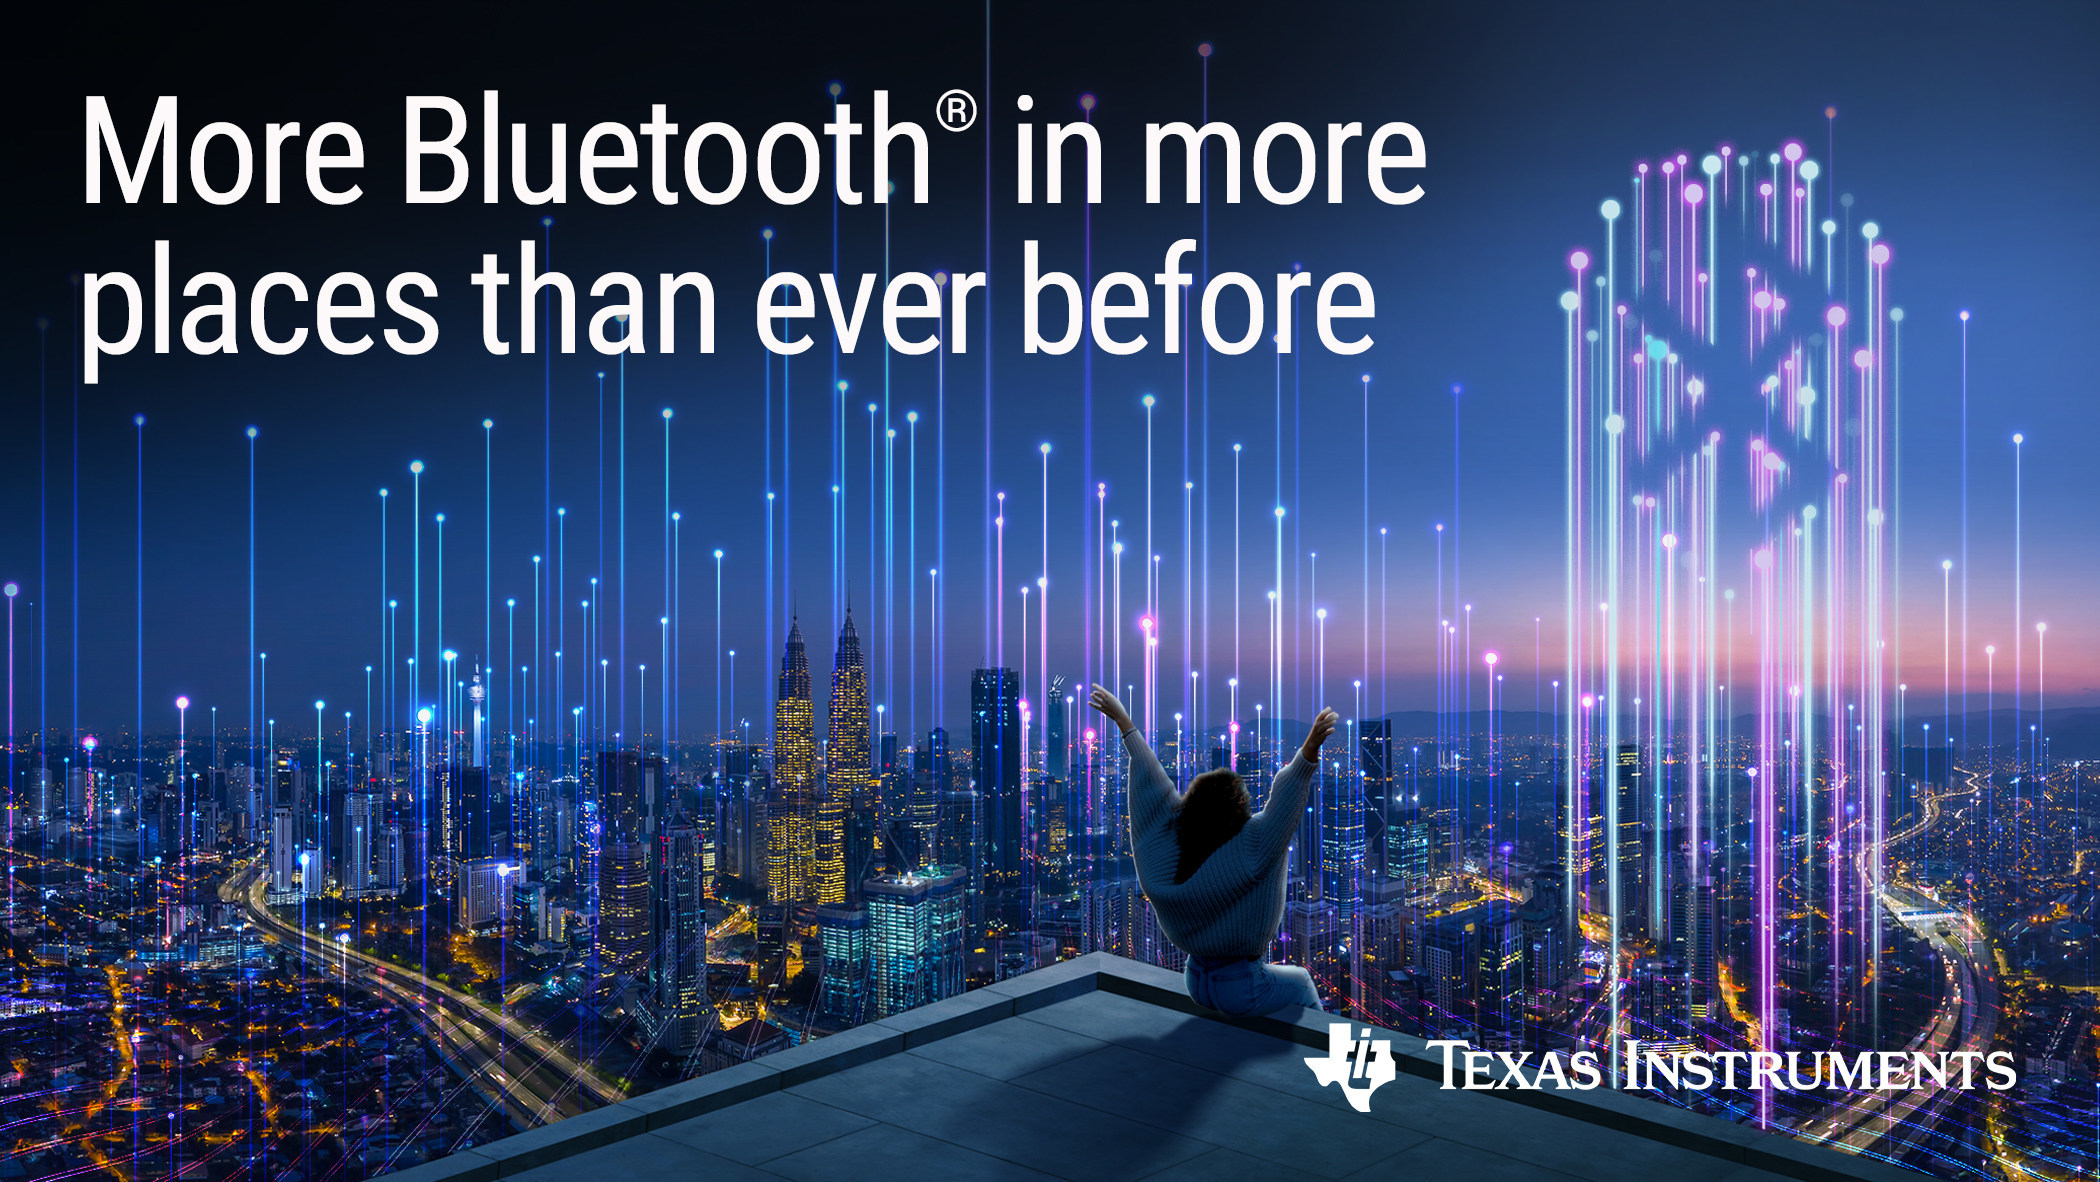 Bluetooth LE CC2340 Featuring Best-in-class Standby Current and Radio-Frequency Performance Enables High-quality Bluetooth LE at an Affordable Price